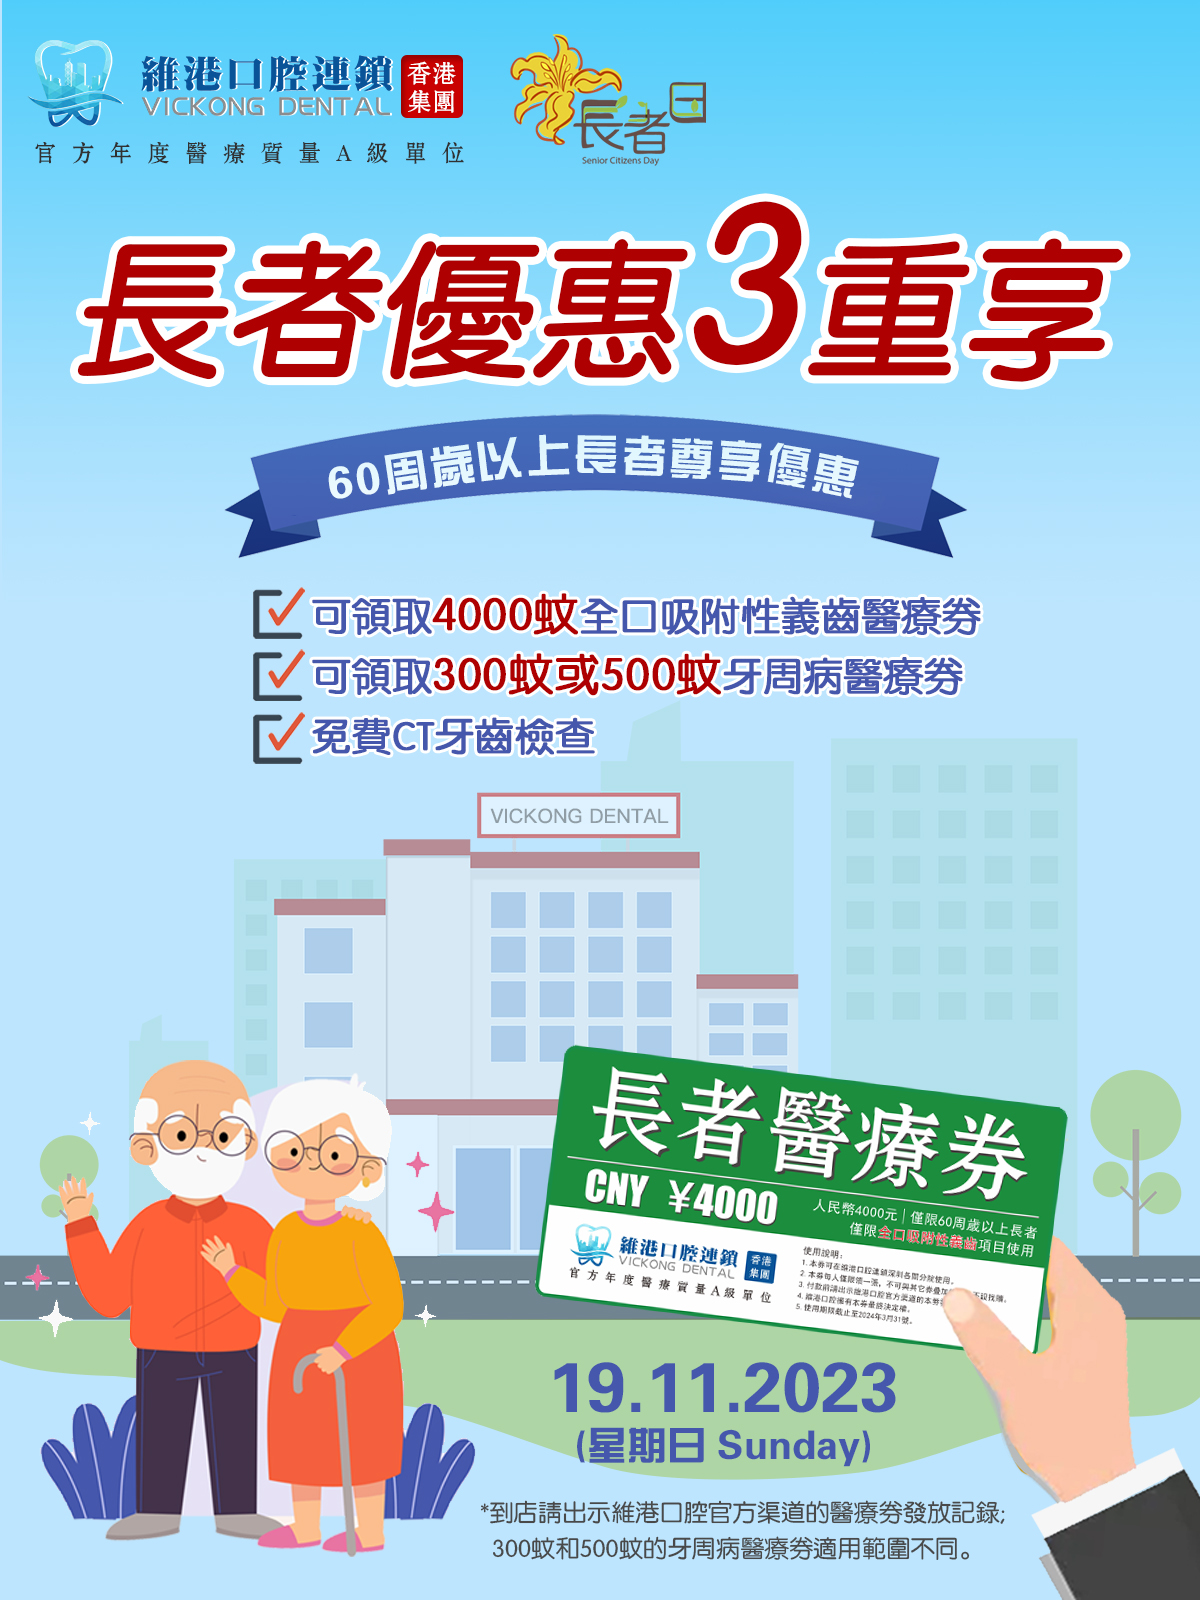 Hong Kong Elderly Day | Elderly Day discount, with up to 4900 mosquito medical vouchers issued!